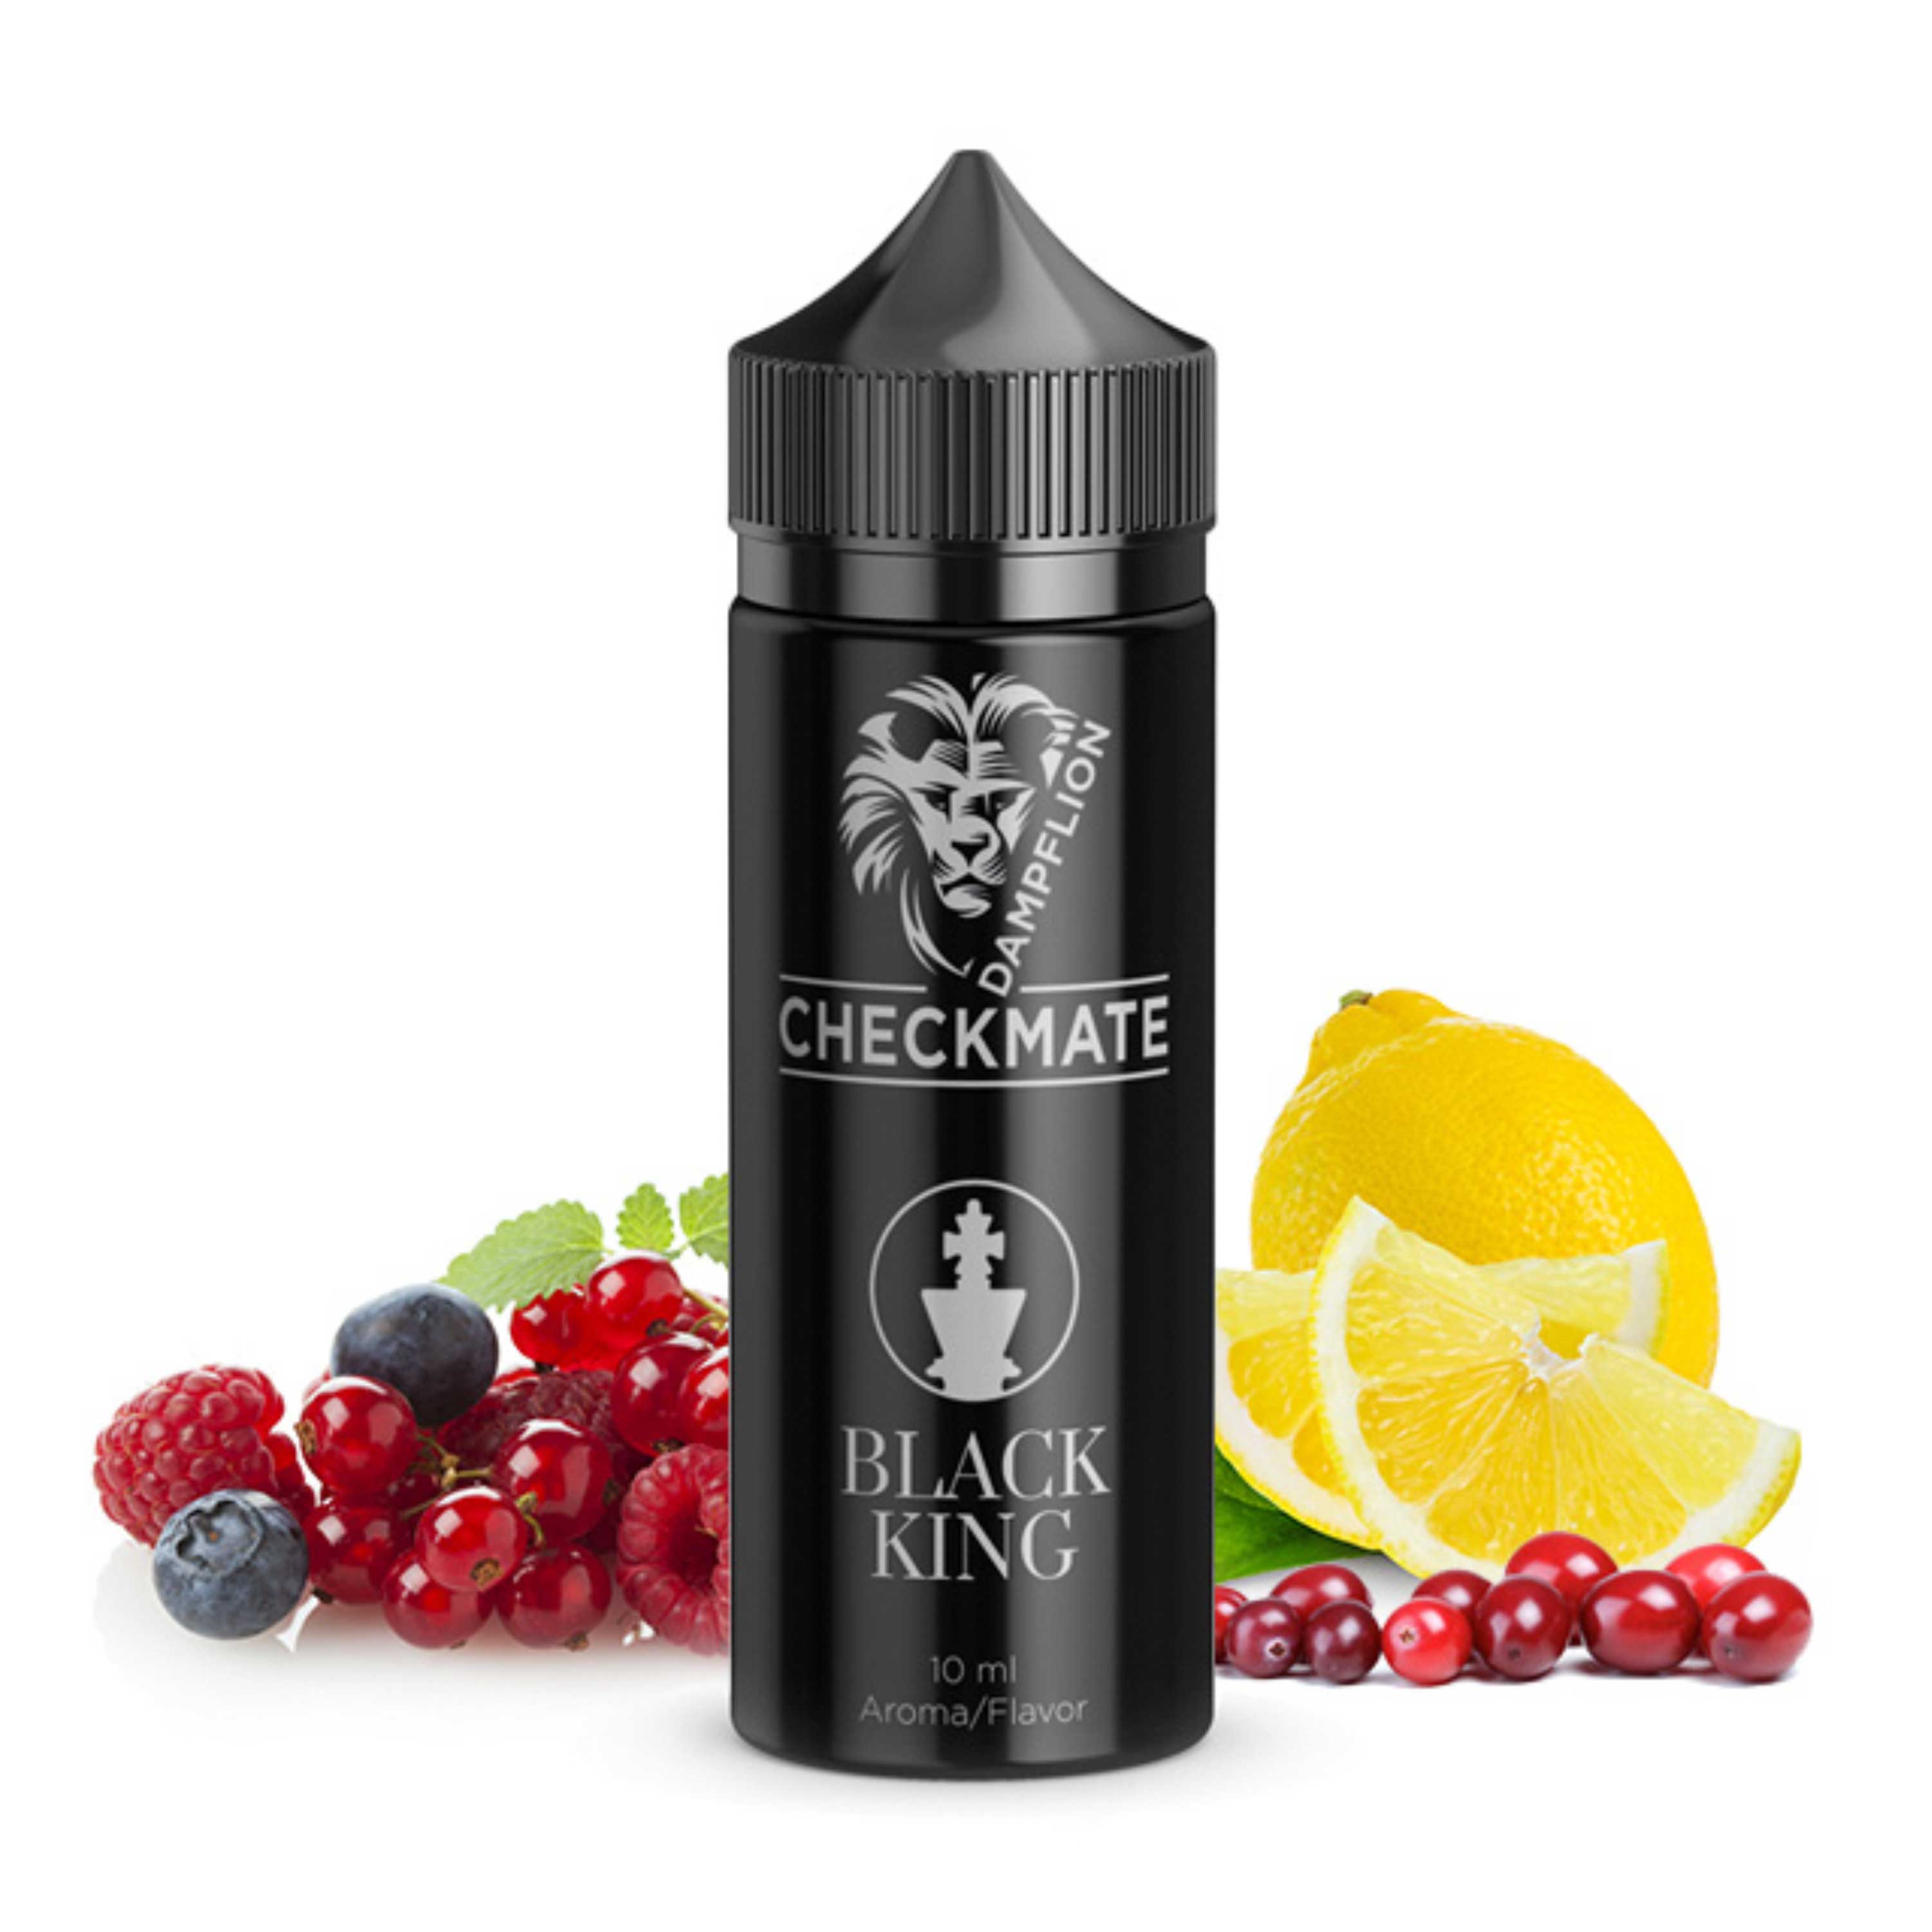 Dampflion - Checkmate - Black King (10 ml in 120 ml LF) - Longfill-Aroma